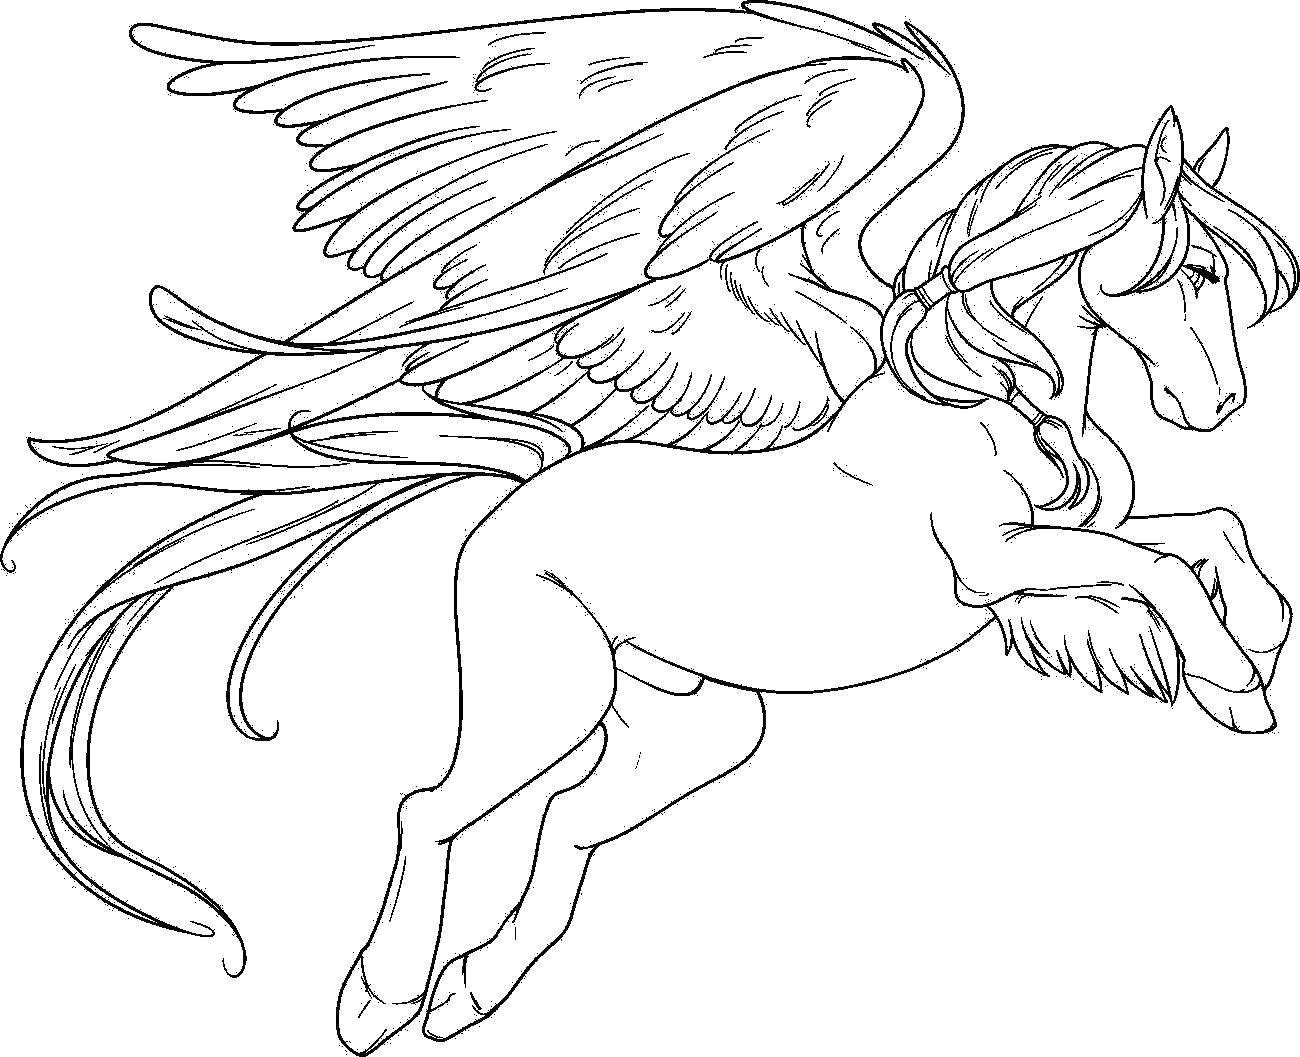 Coloring Beautiful winged horse. Category coloring. Tags:  Pegasus, wings, horse.